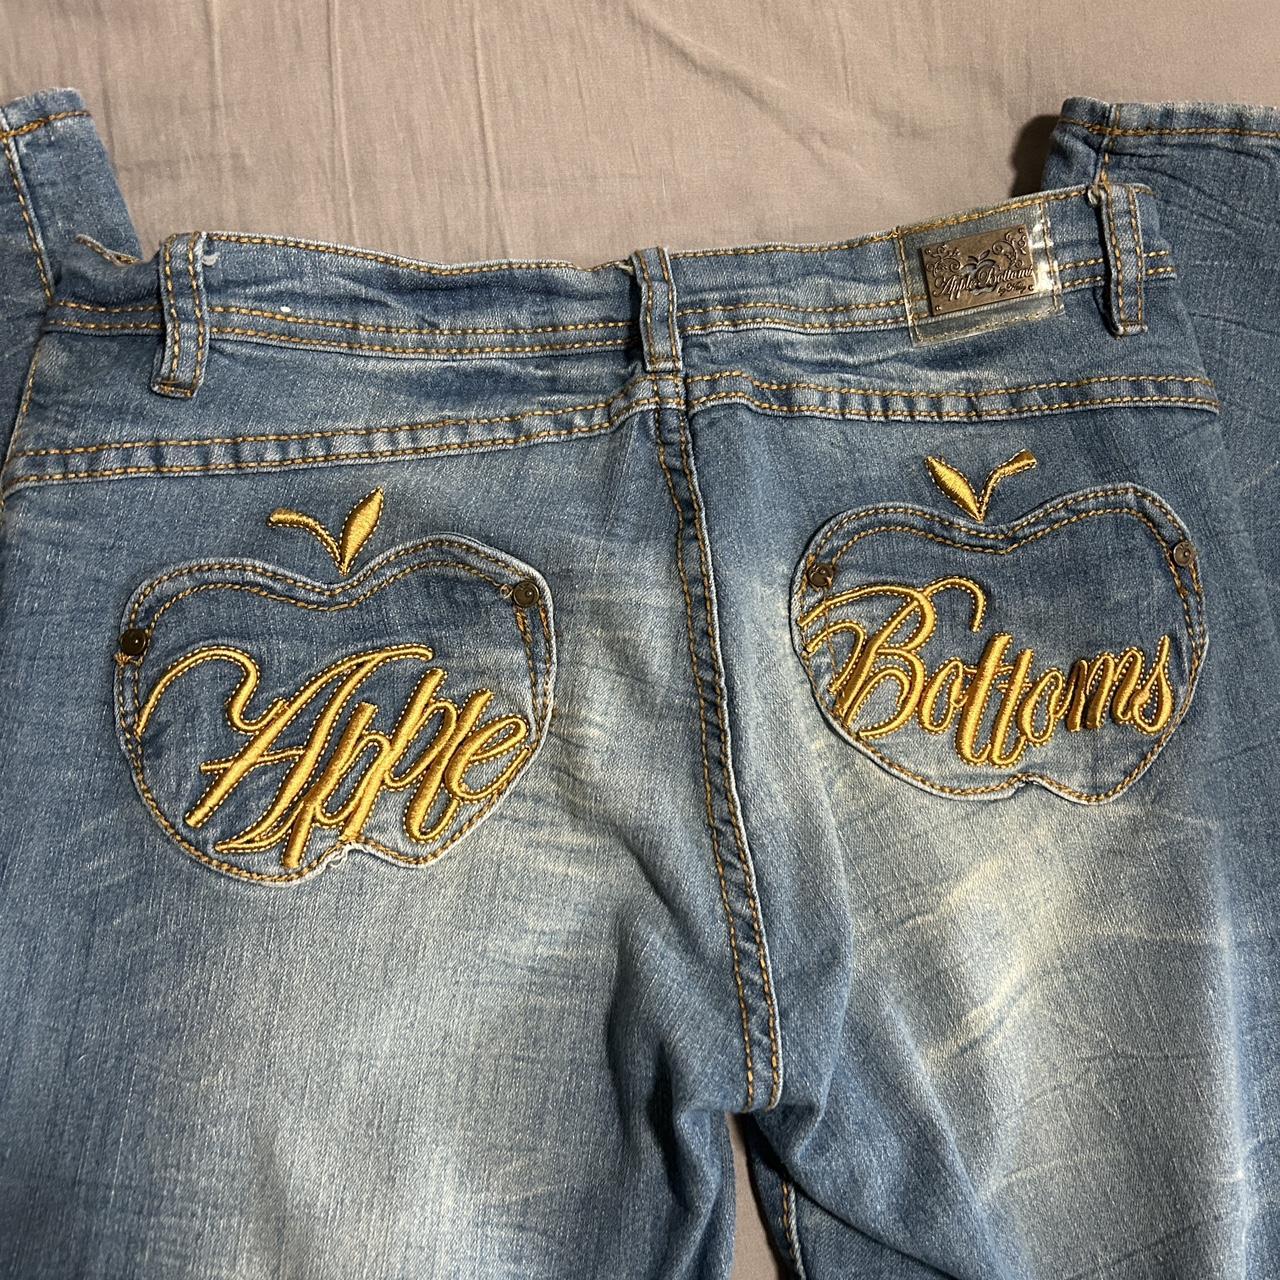 Apple Bottoms Women's Blue and Yellow Jeans (2)